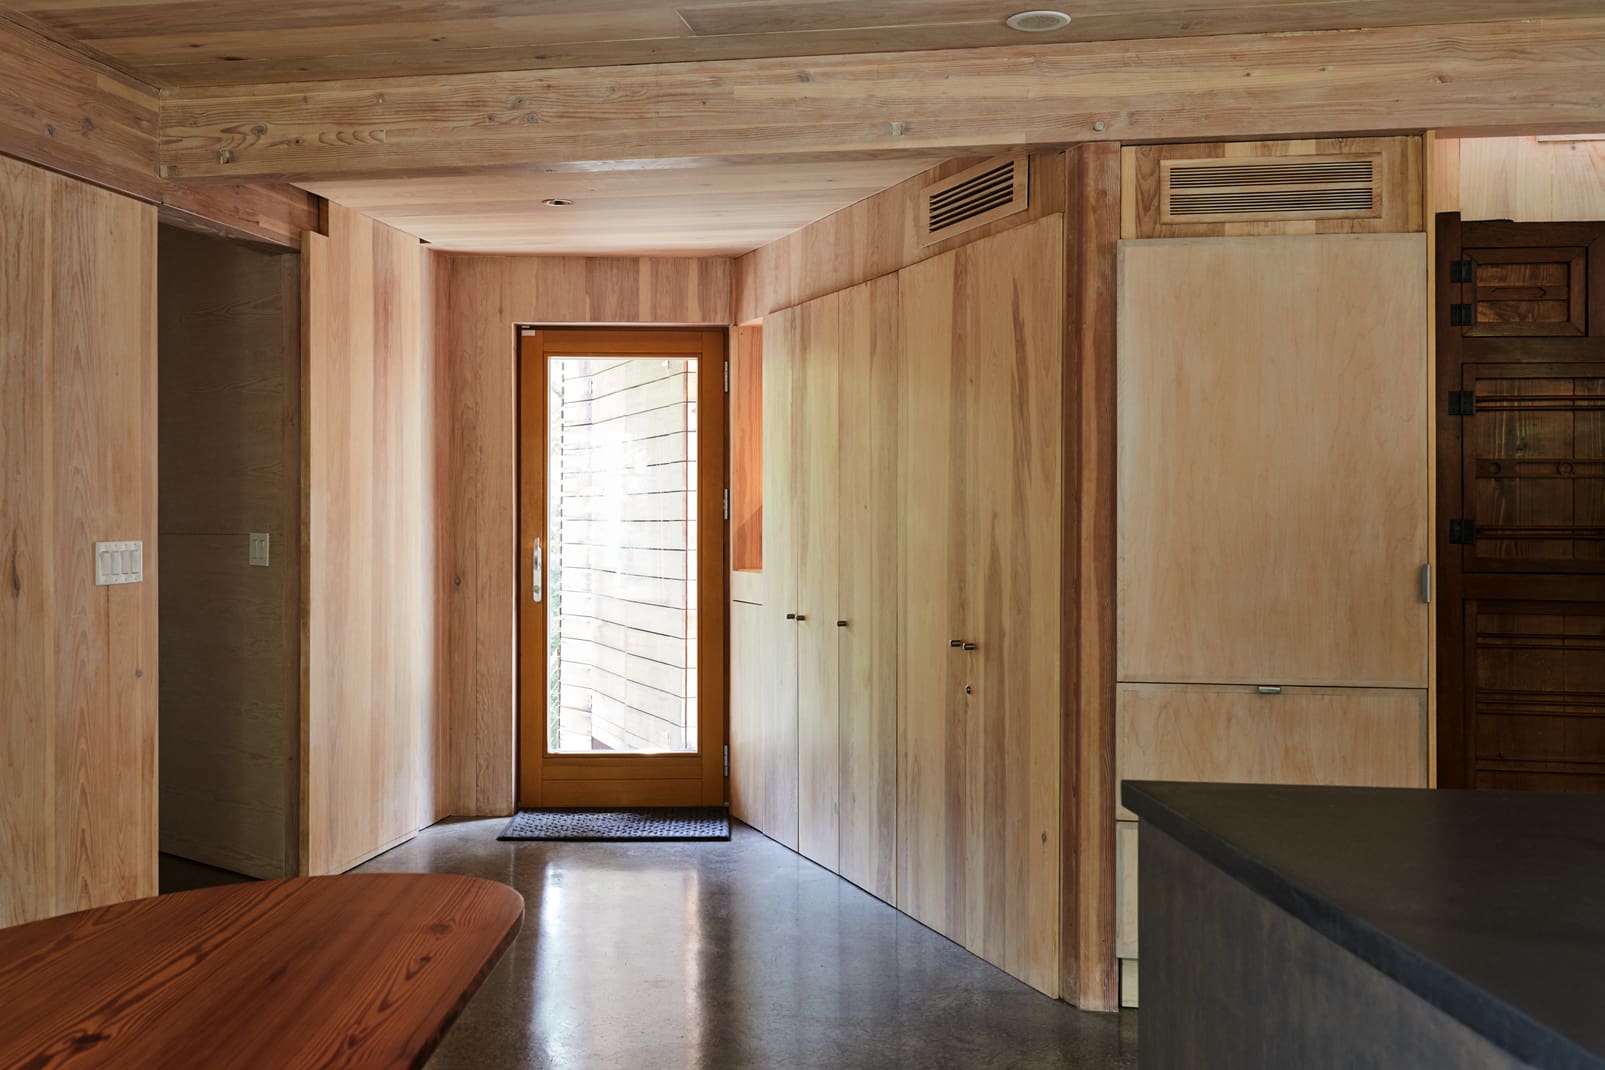 Entry way with wood paneling in a modern passive house